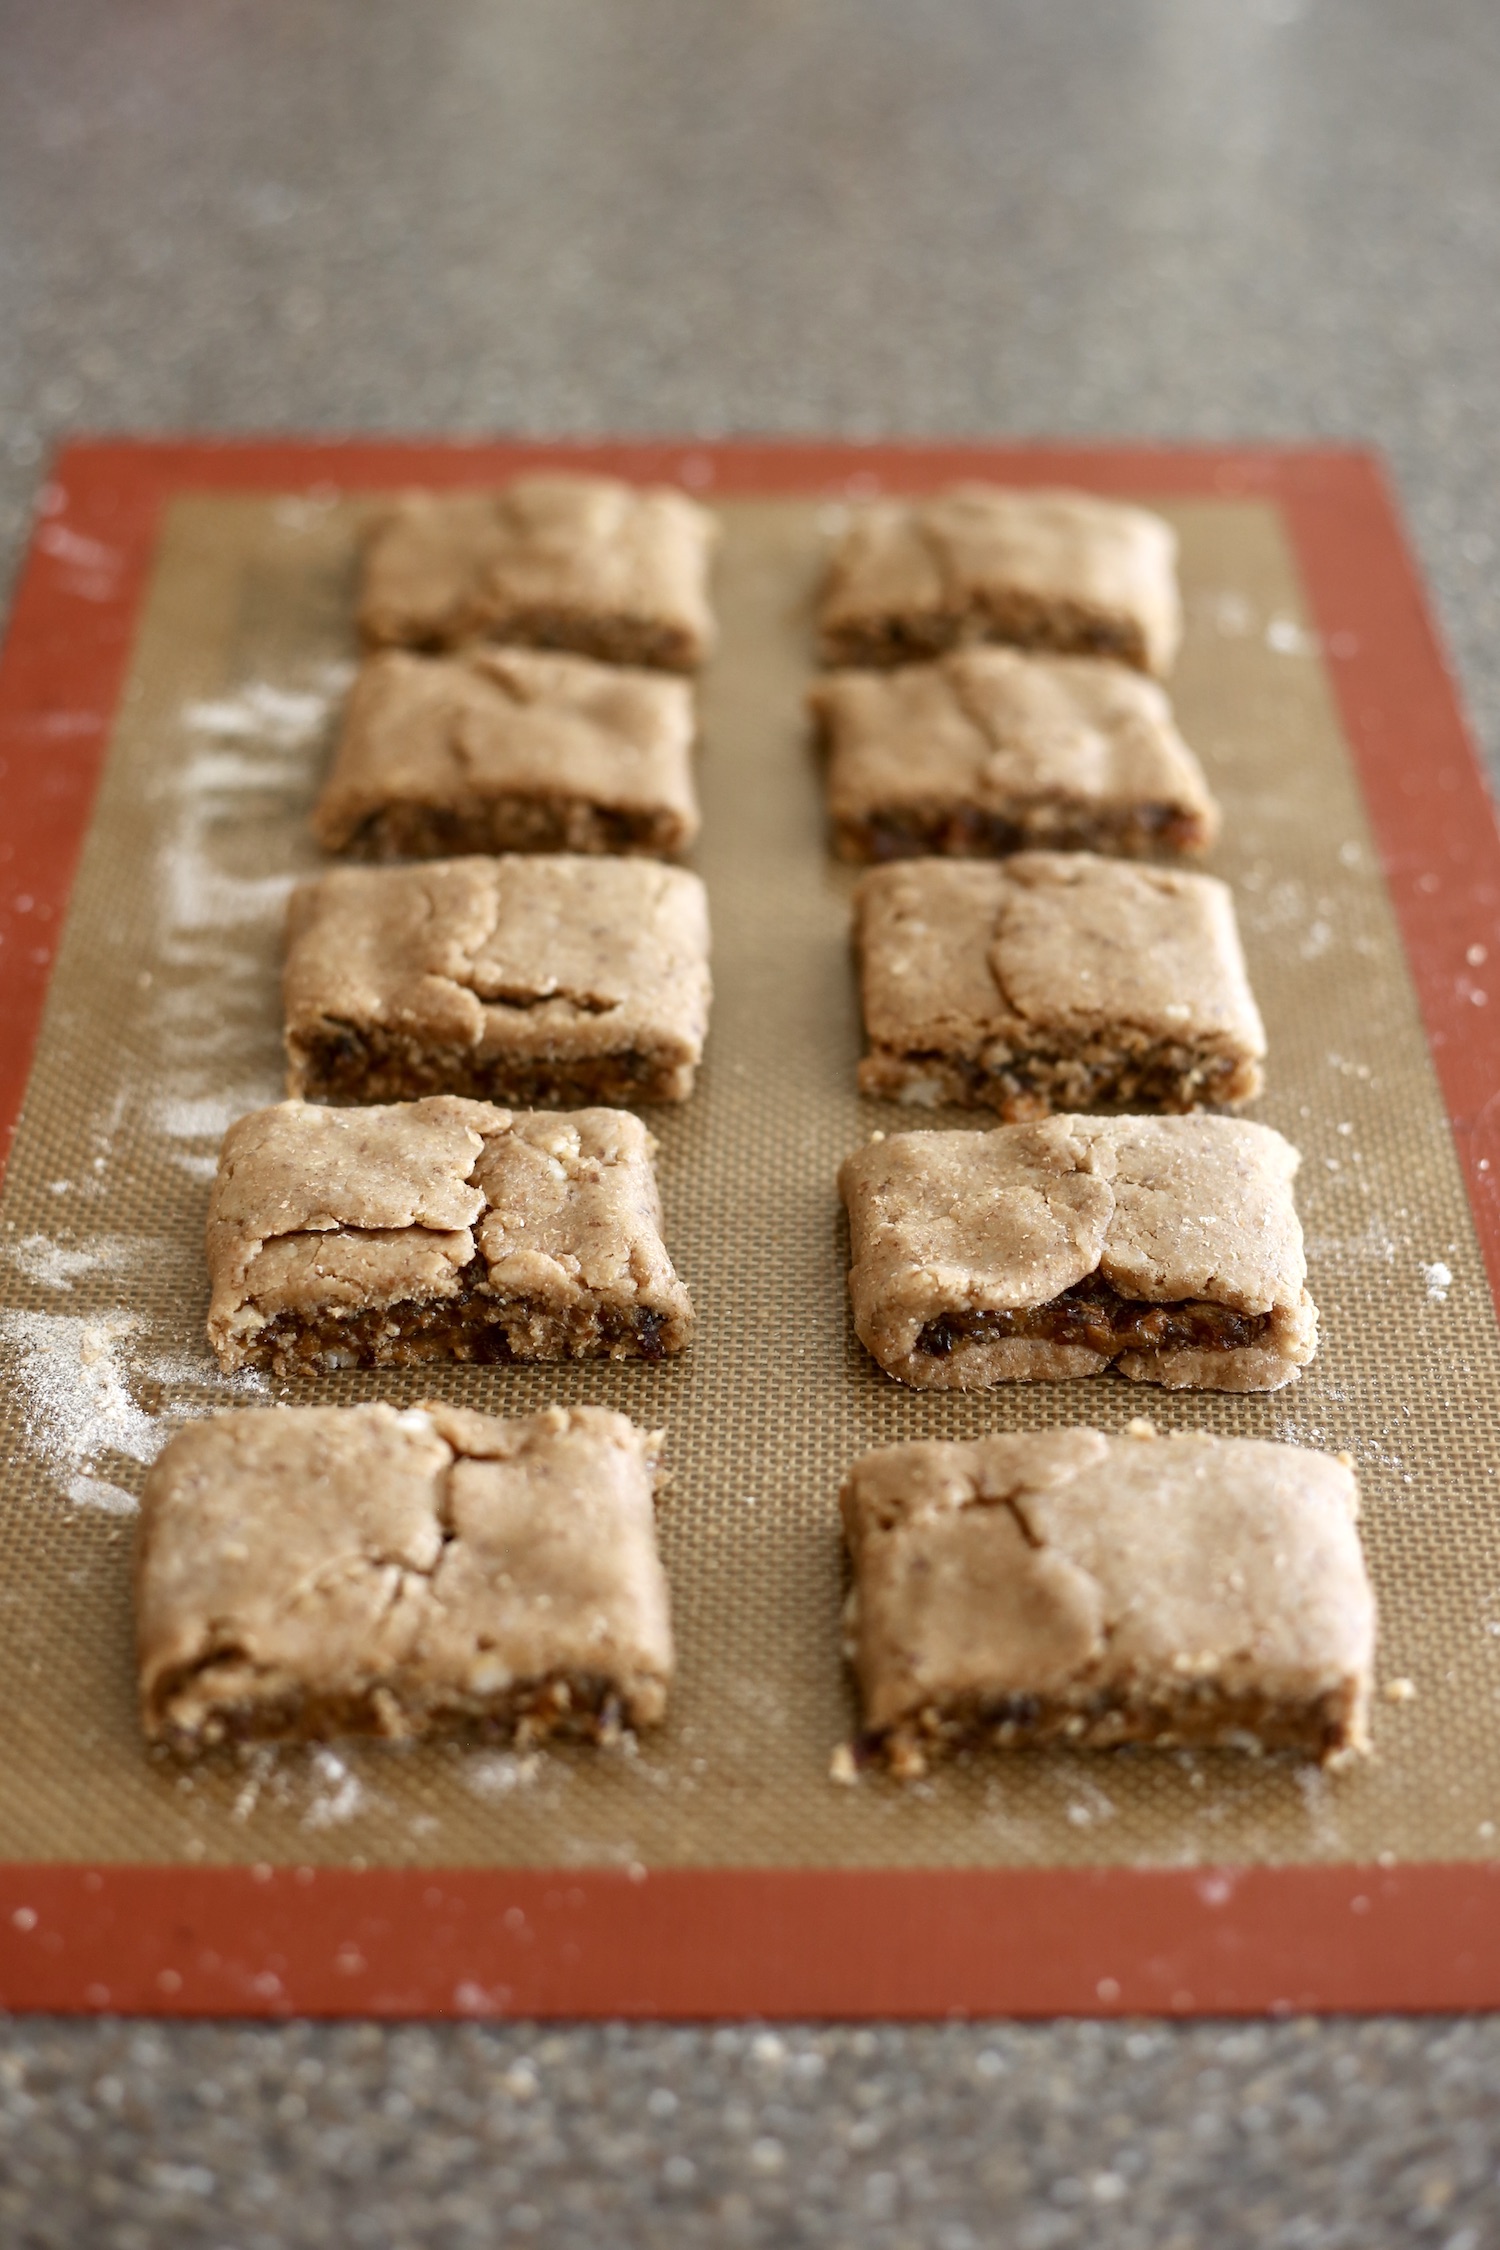 homemade fig newtons on a silicone baking mat before baking